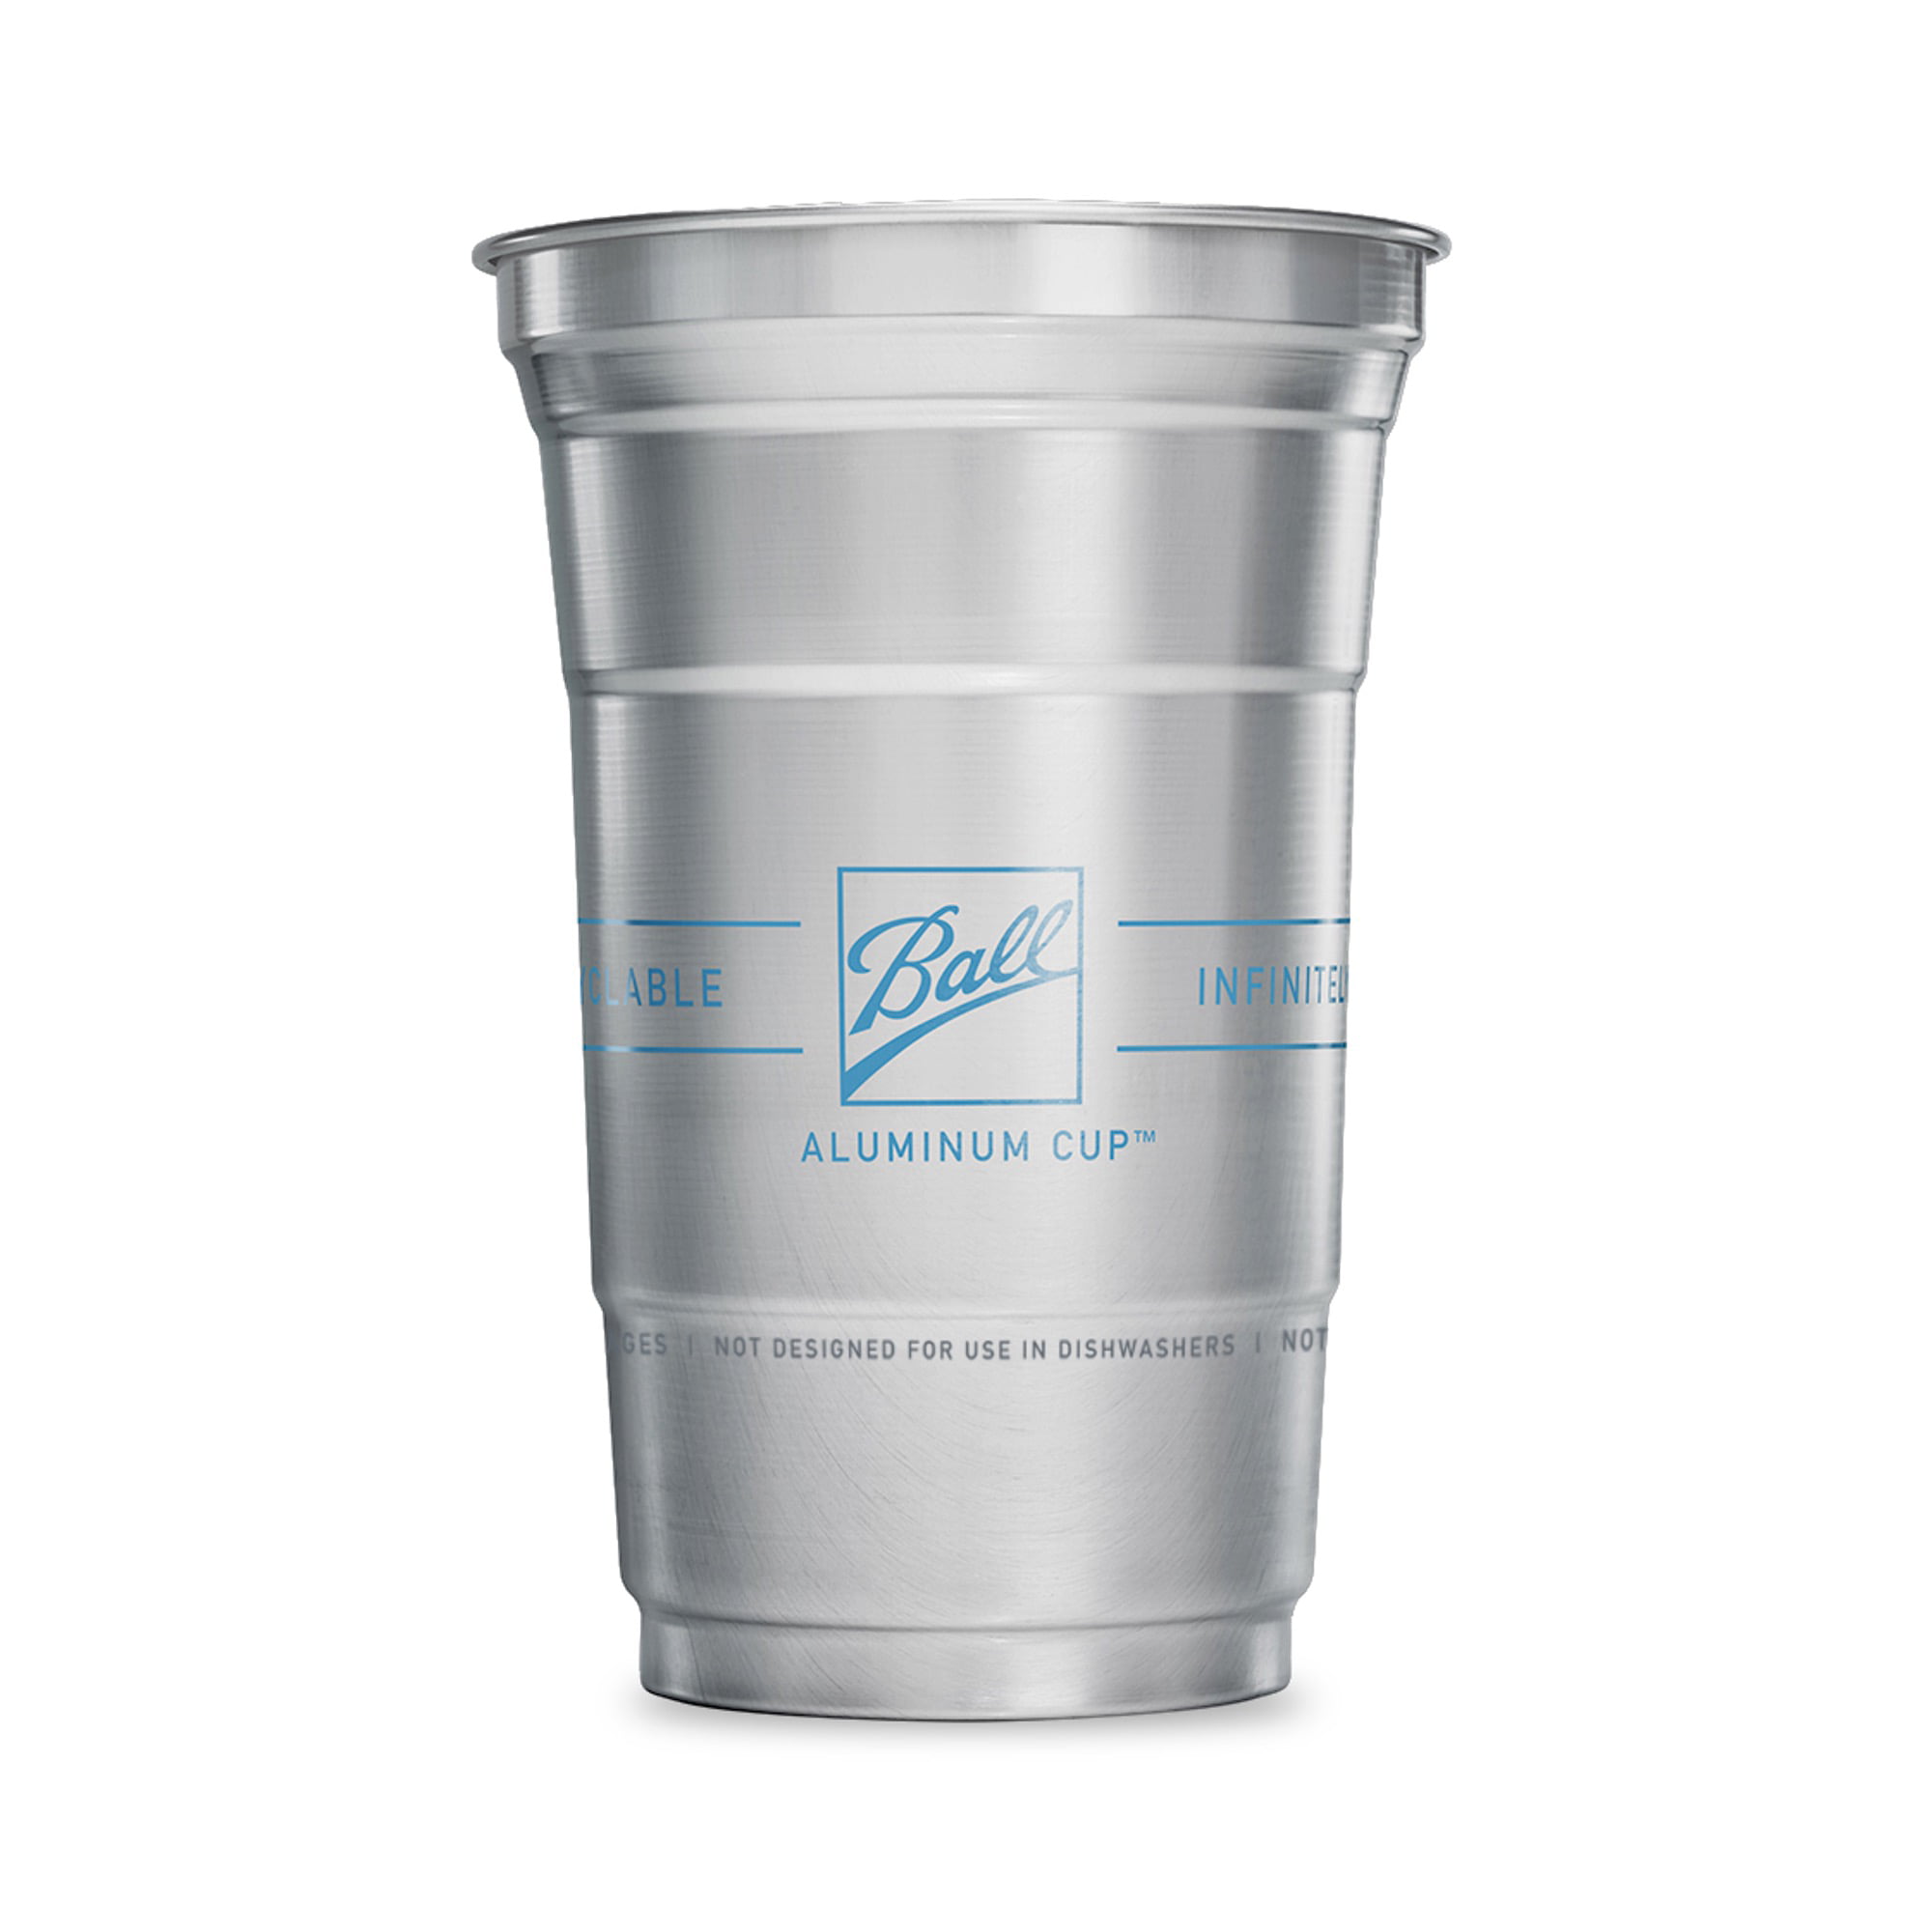 Ball Aluminum Cup™ Expands Rollout to Retailers in 50 States